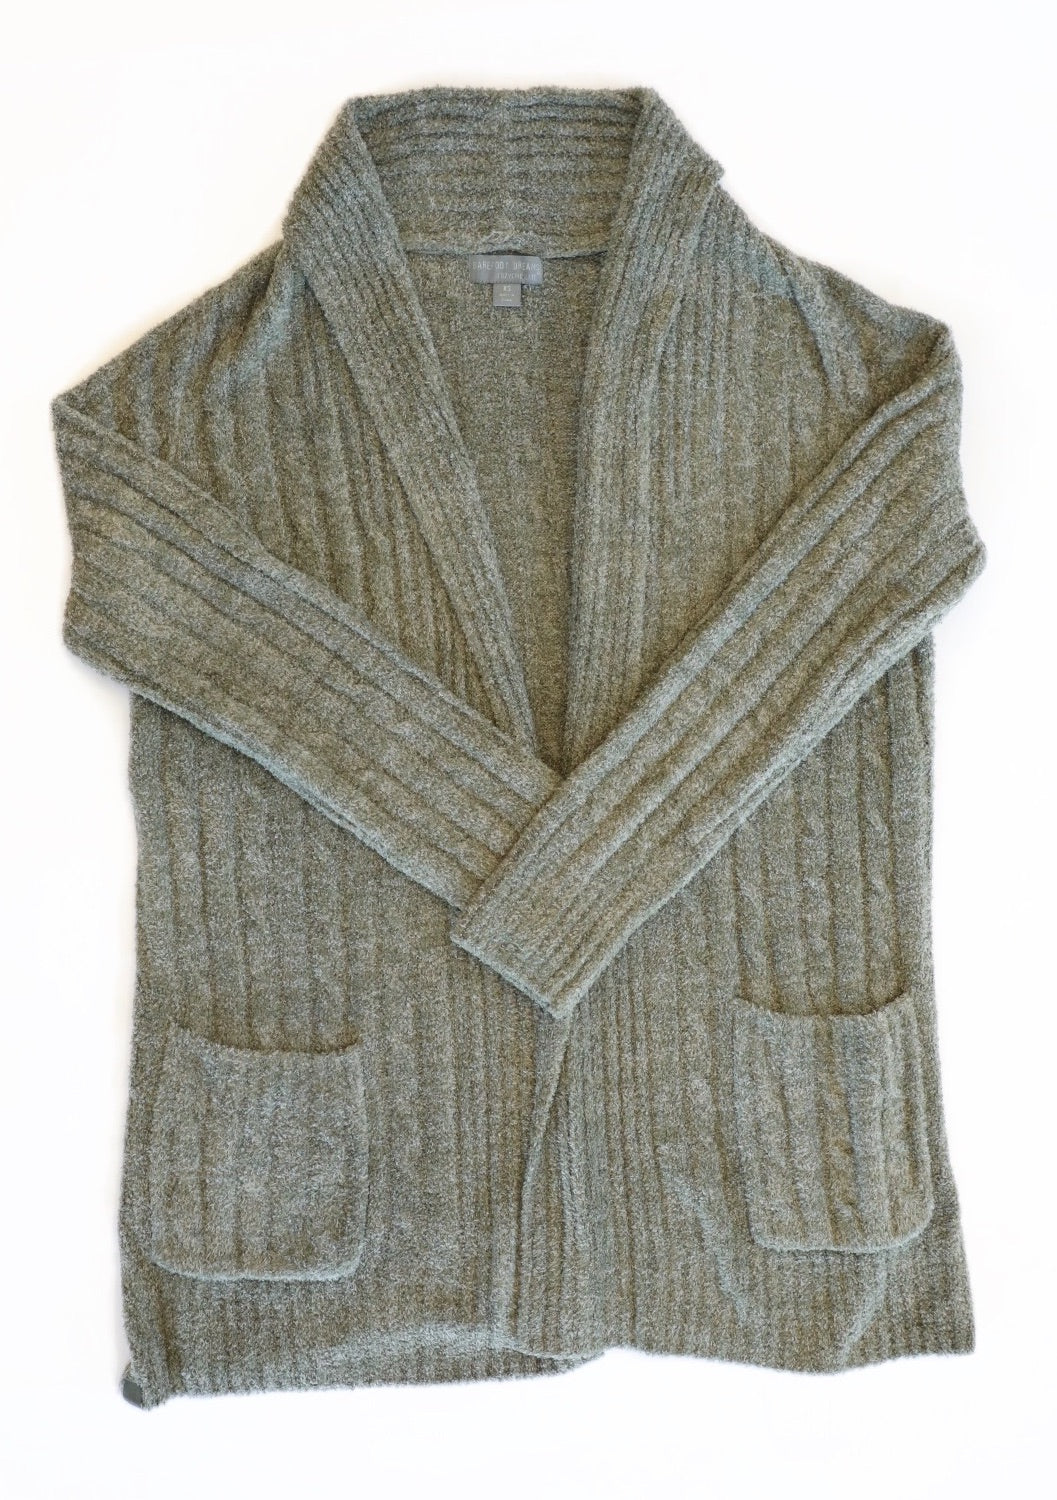 BAREFOOT DREAMS - Cozychic Lite Cable Cardi in Olive/Loden